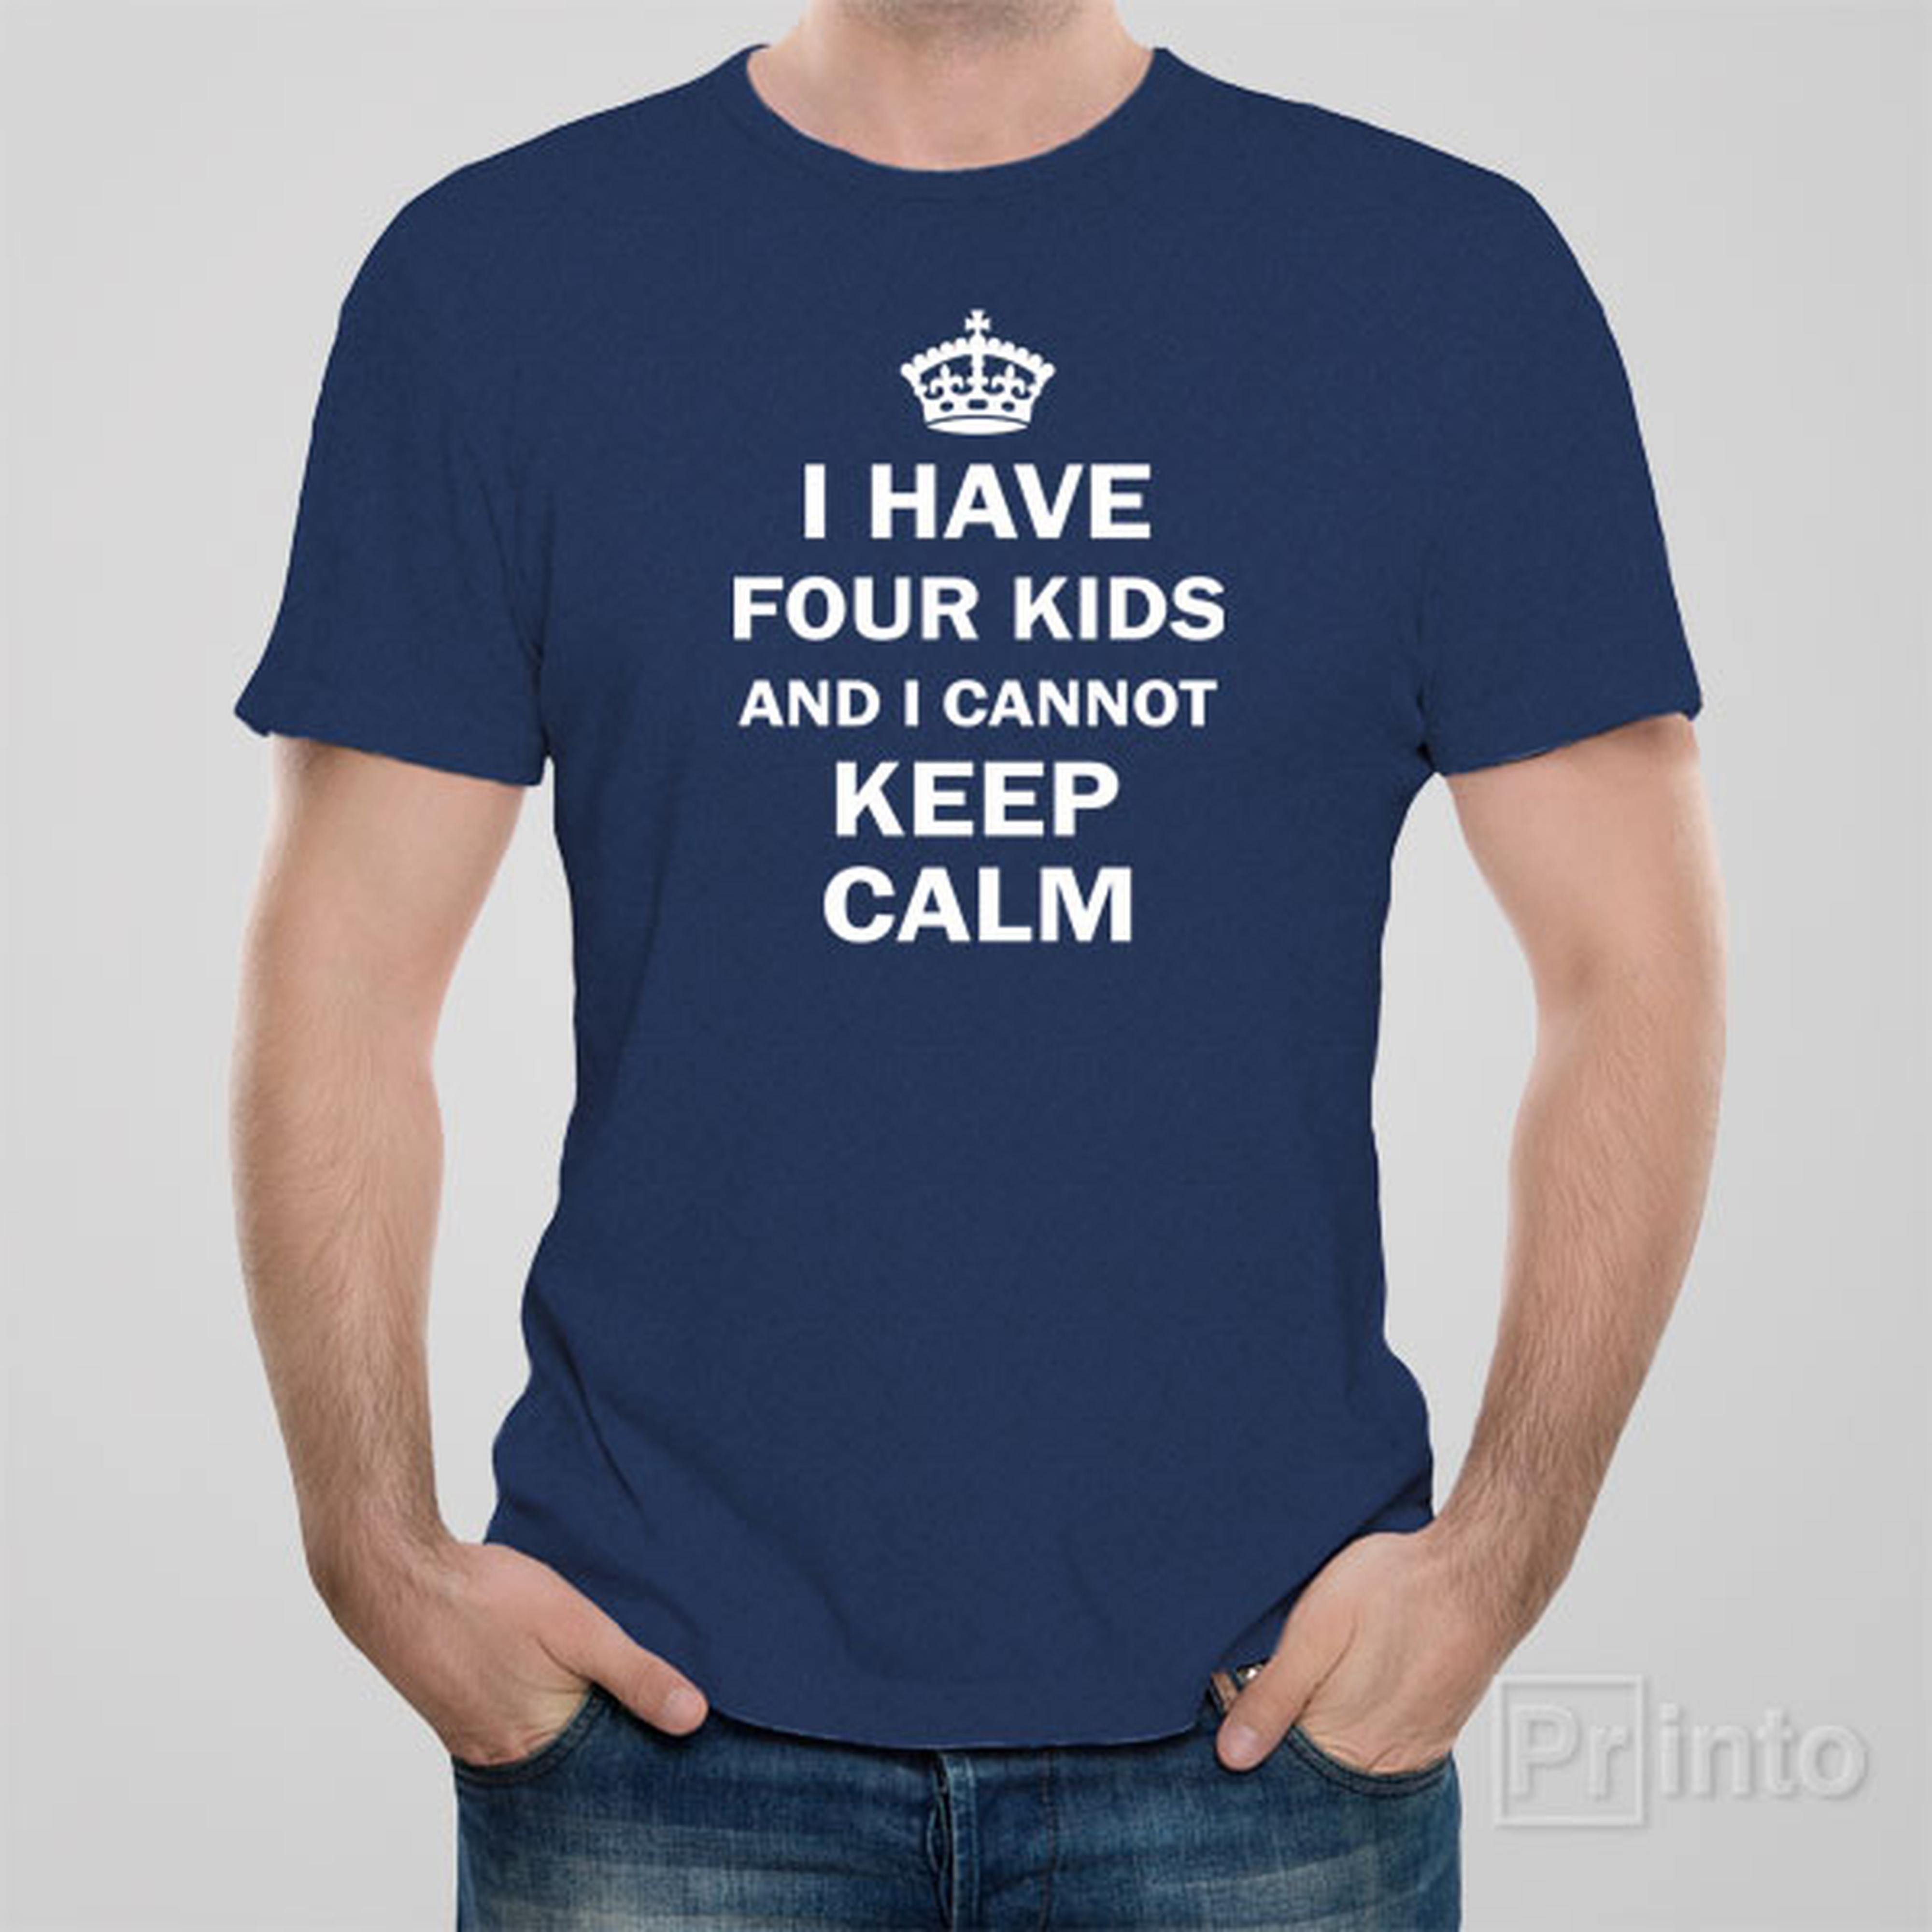 i-have-4-kids-and-i-cannot-keep-calm-t-shirt